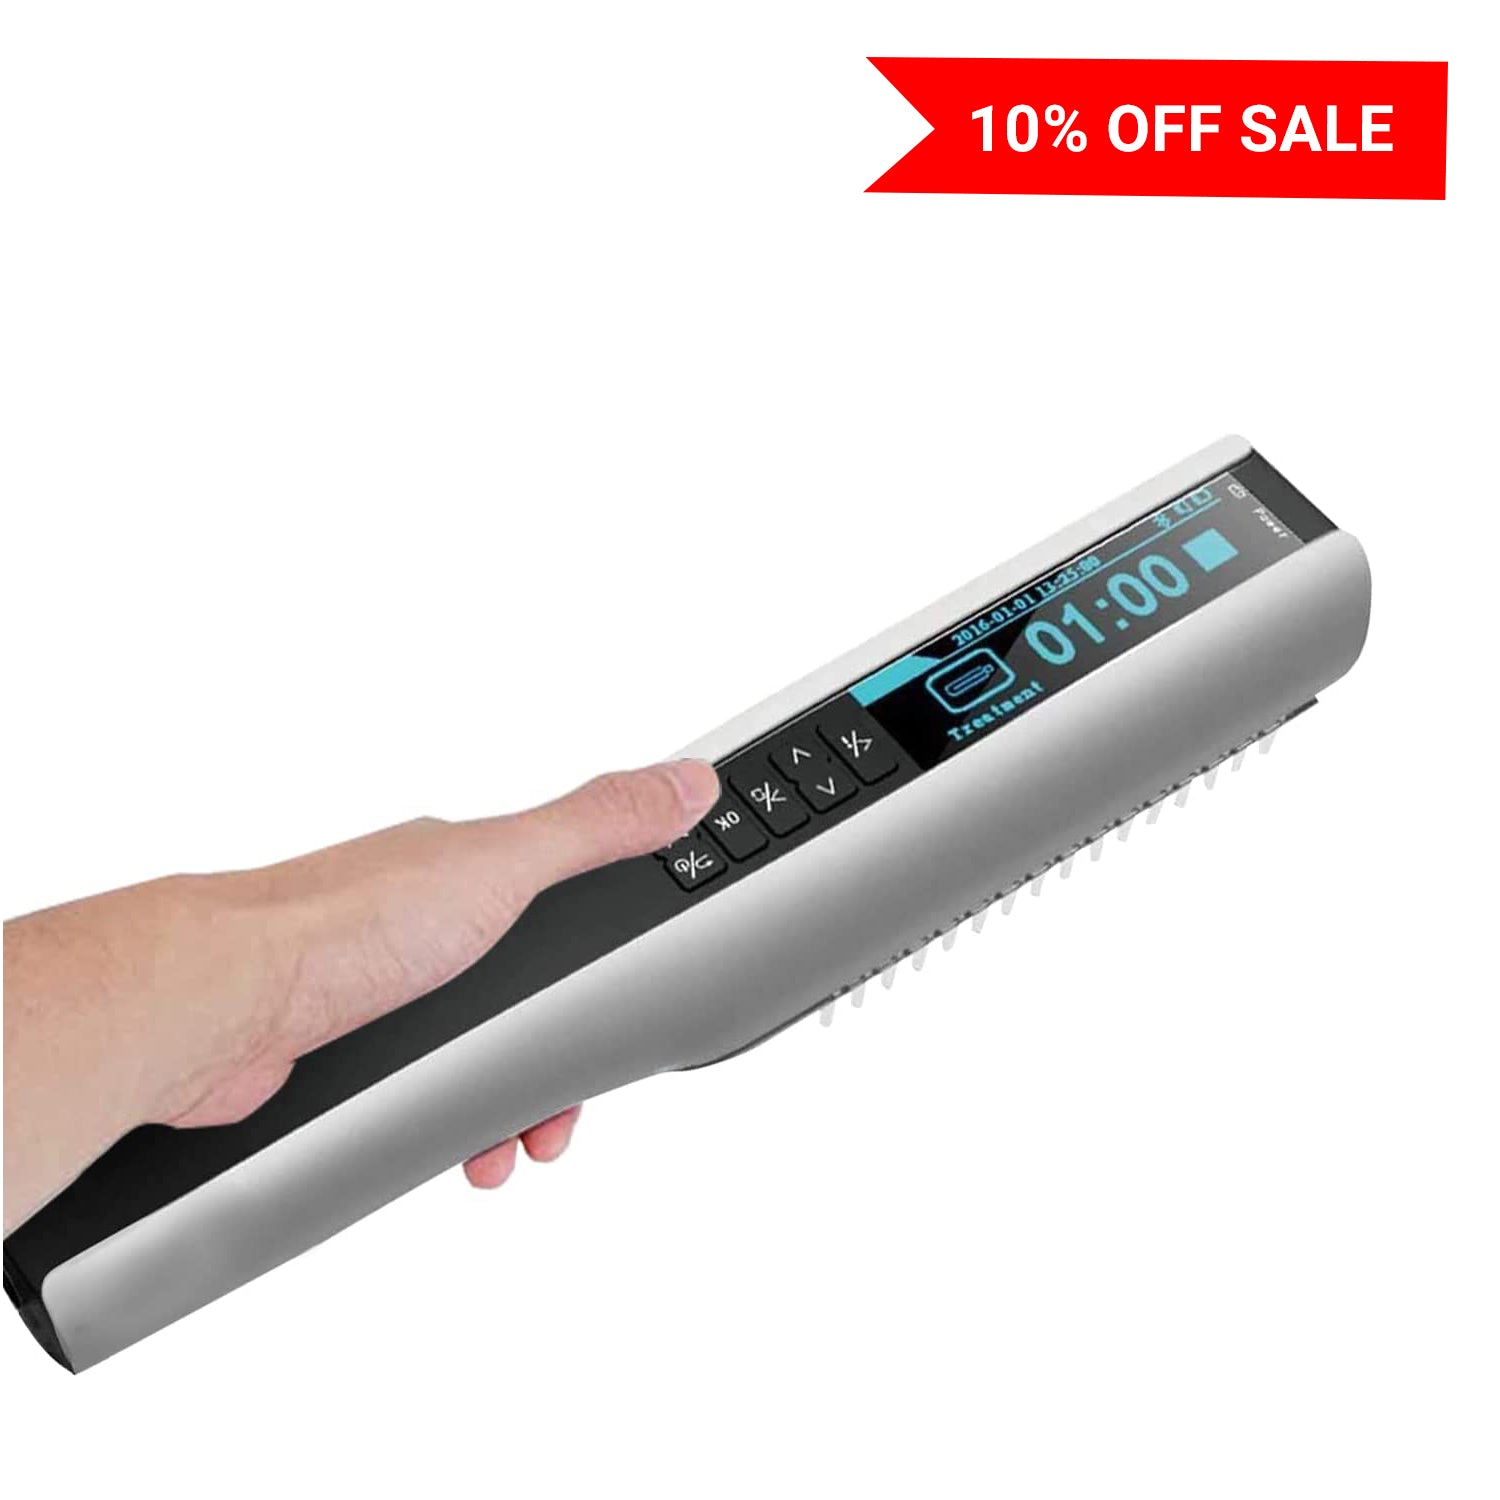 Cordless UV 311nm Narrow Band Phototherapy Light by Brightwand, UV Light with Timer Control, Home Use UV/311nm - Medical Grade Philips Bulb. Treats a variety of skin conditions